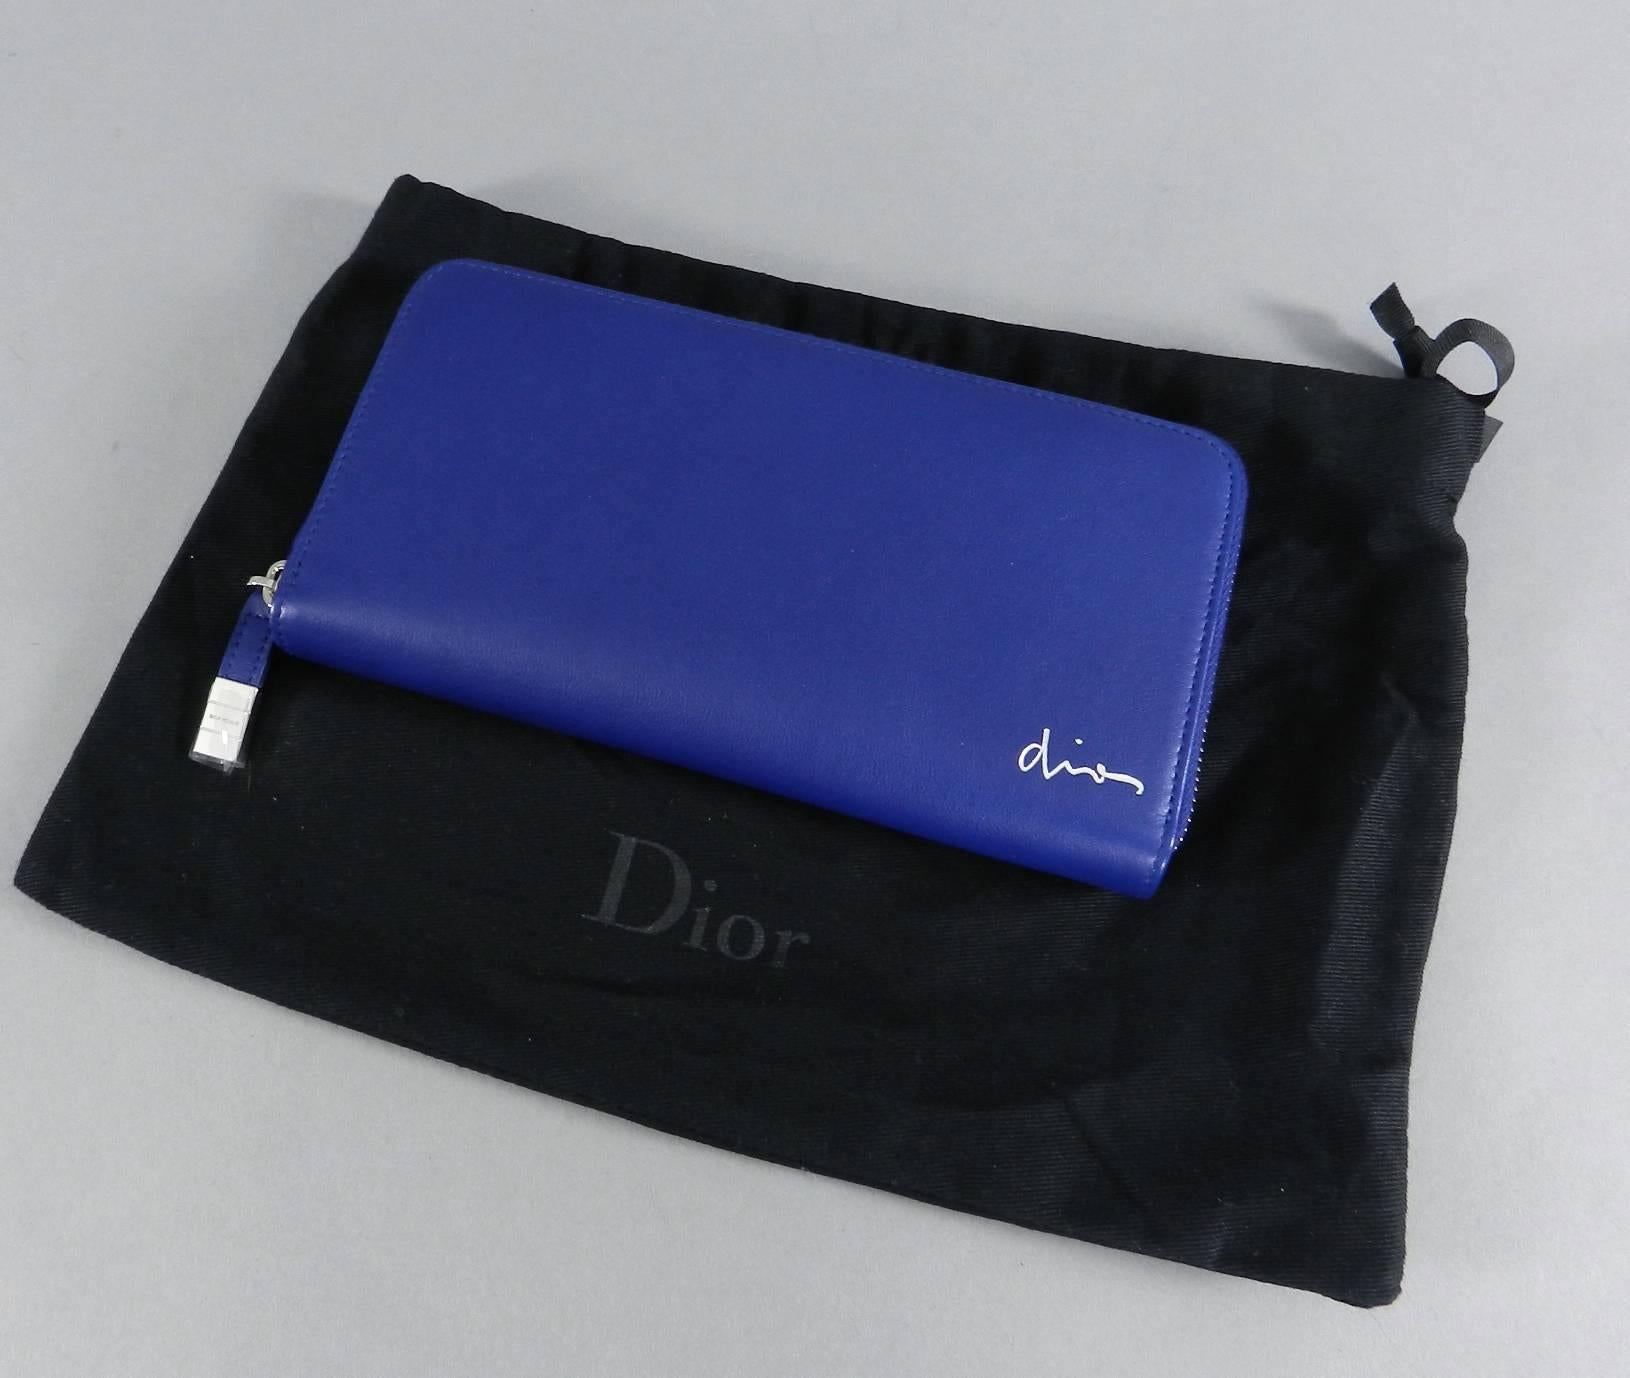 DIOR HOMME Mens Cobalt Blue Leather Zip Double Wallet.  Zippered interior compartment for coins, double compartments for bills and cards.  Made in Italy.  100% authentic. Includes duster, has original plastic on zipper pull, and original papers in